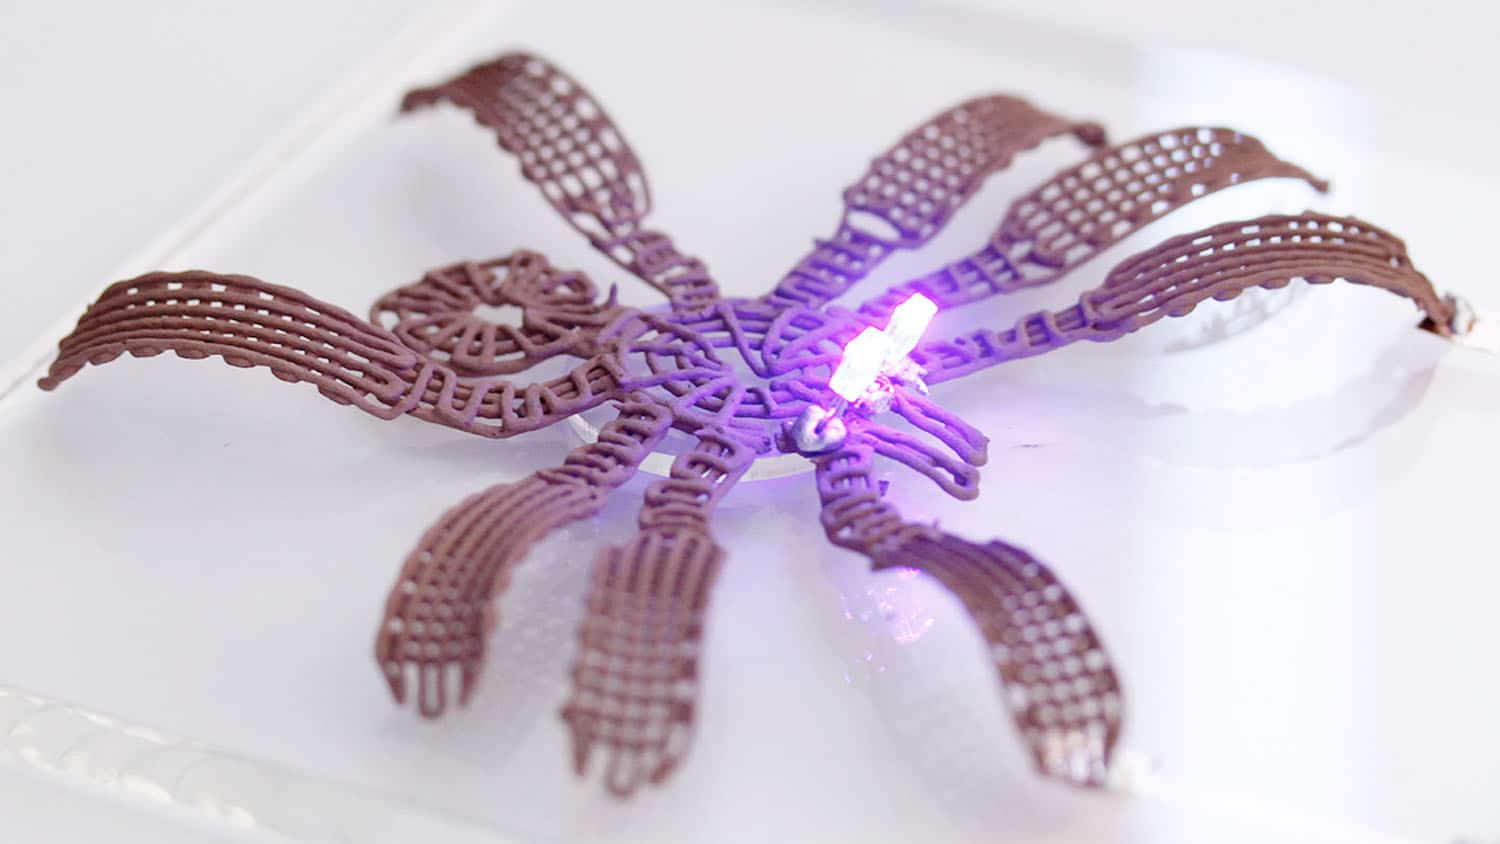 a metallic spider sits on a white table. the spider has a glowing LED on its head